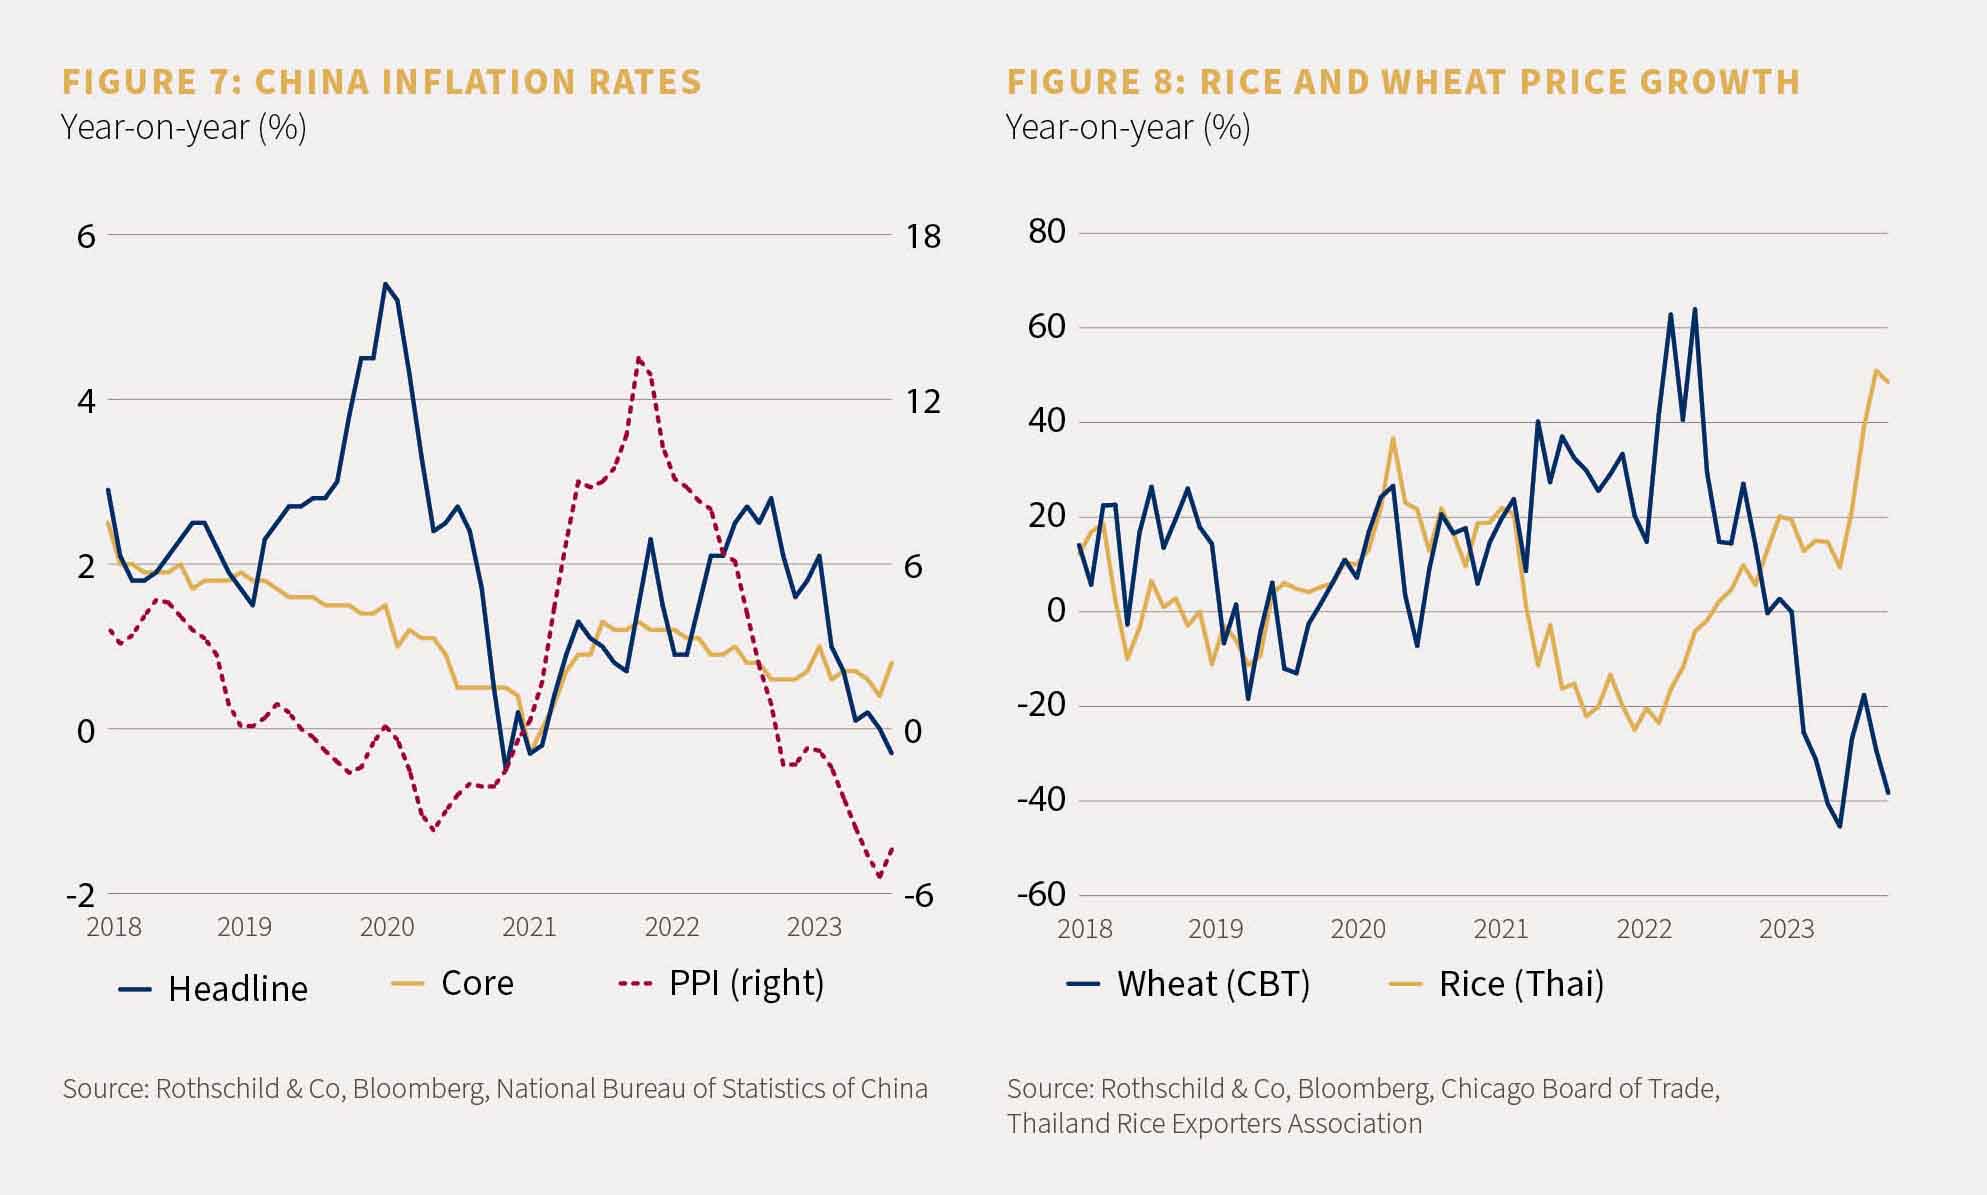 Chart 7 showing the china inflation rates and chart 8 showing the rice and wheat price growth